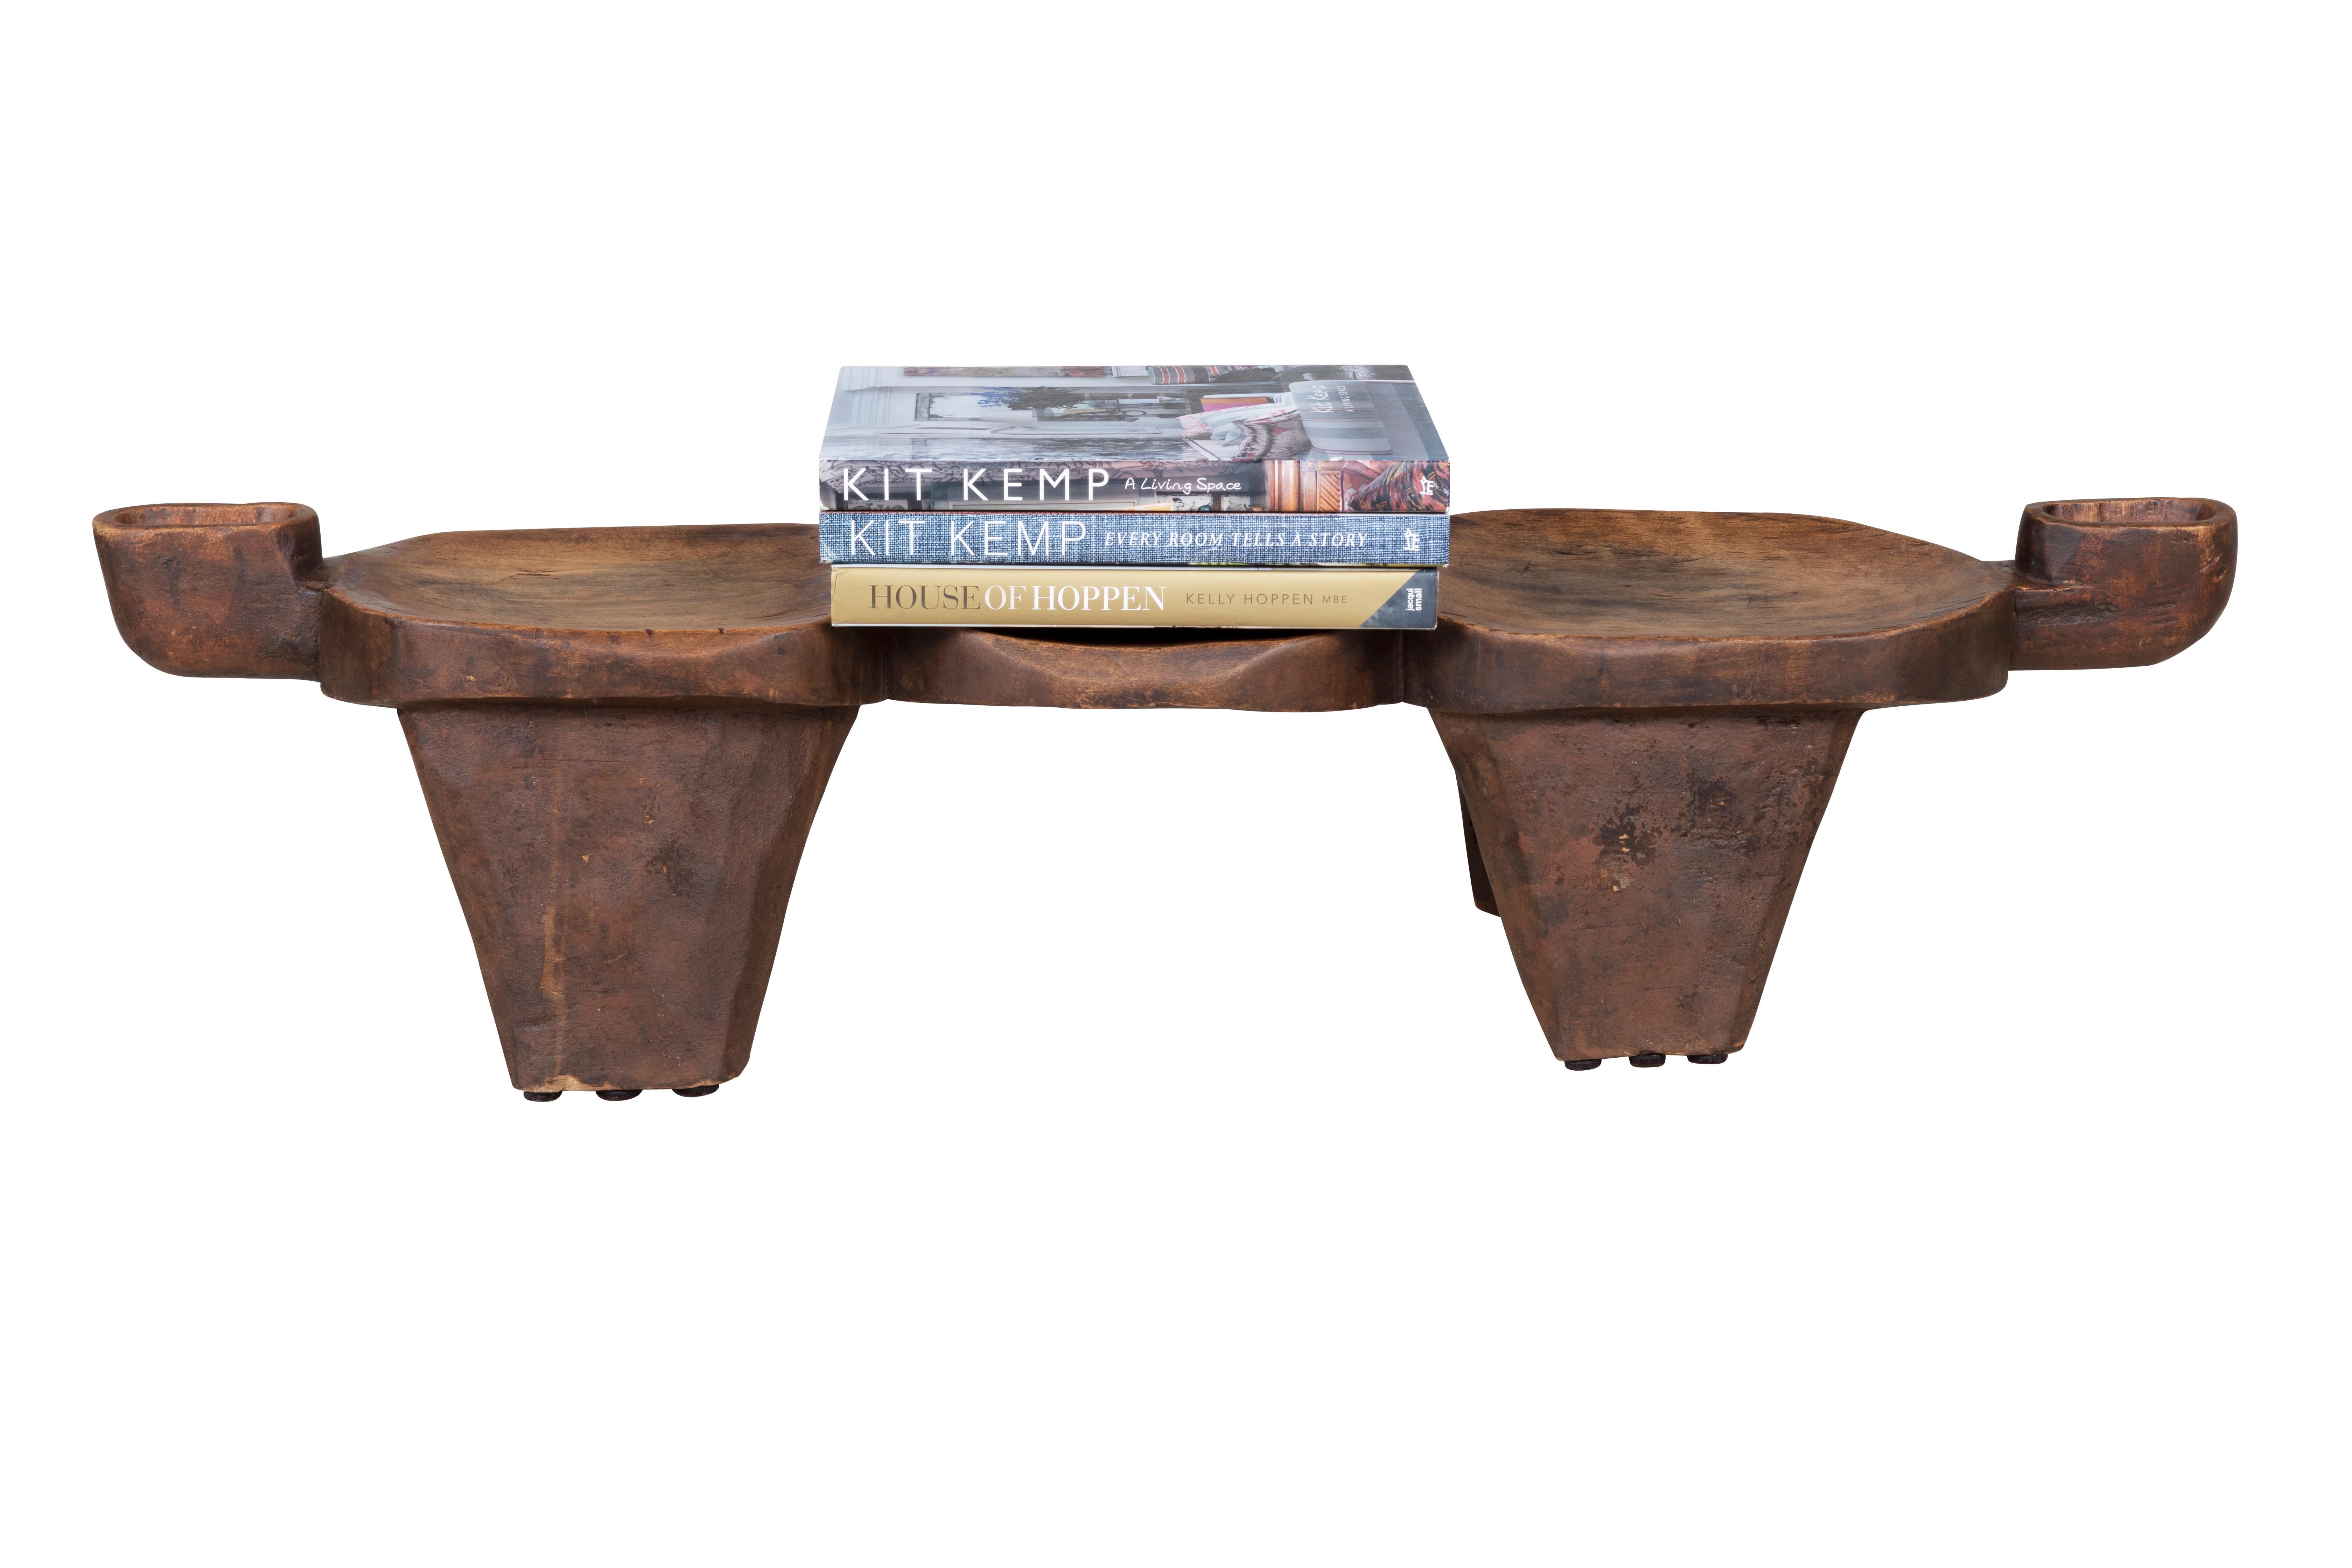 This uniquely shaped four-legged stool comes from the Lobi people of the Northern Ivory Coast and Ghana and the lower reaches of Burkina Faso. Spread across the boundaries of three countries the Lobi live in individual fort-like family compounds in